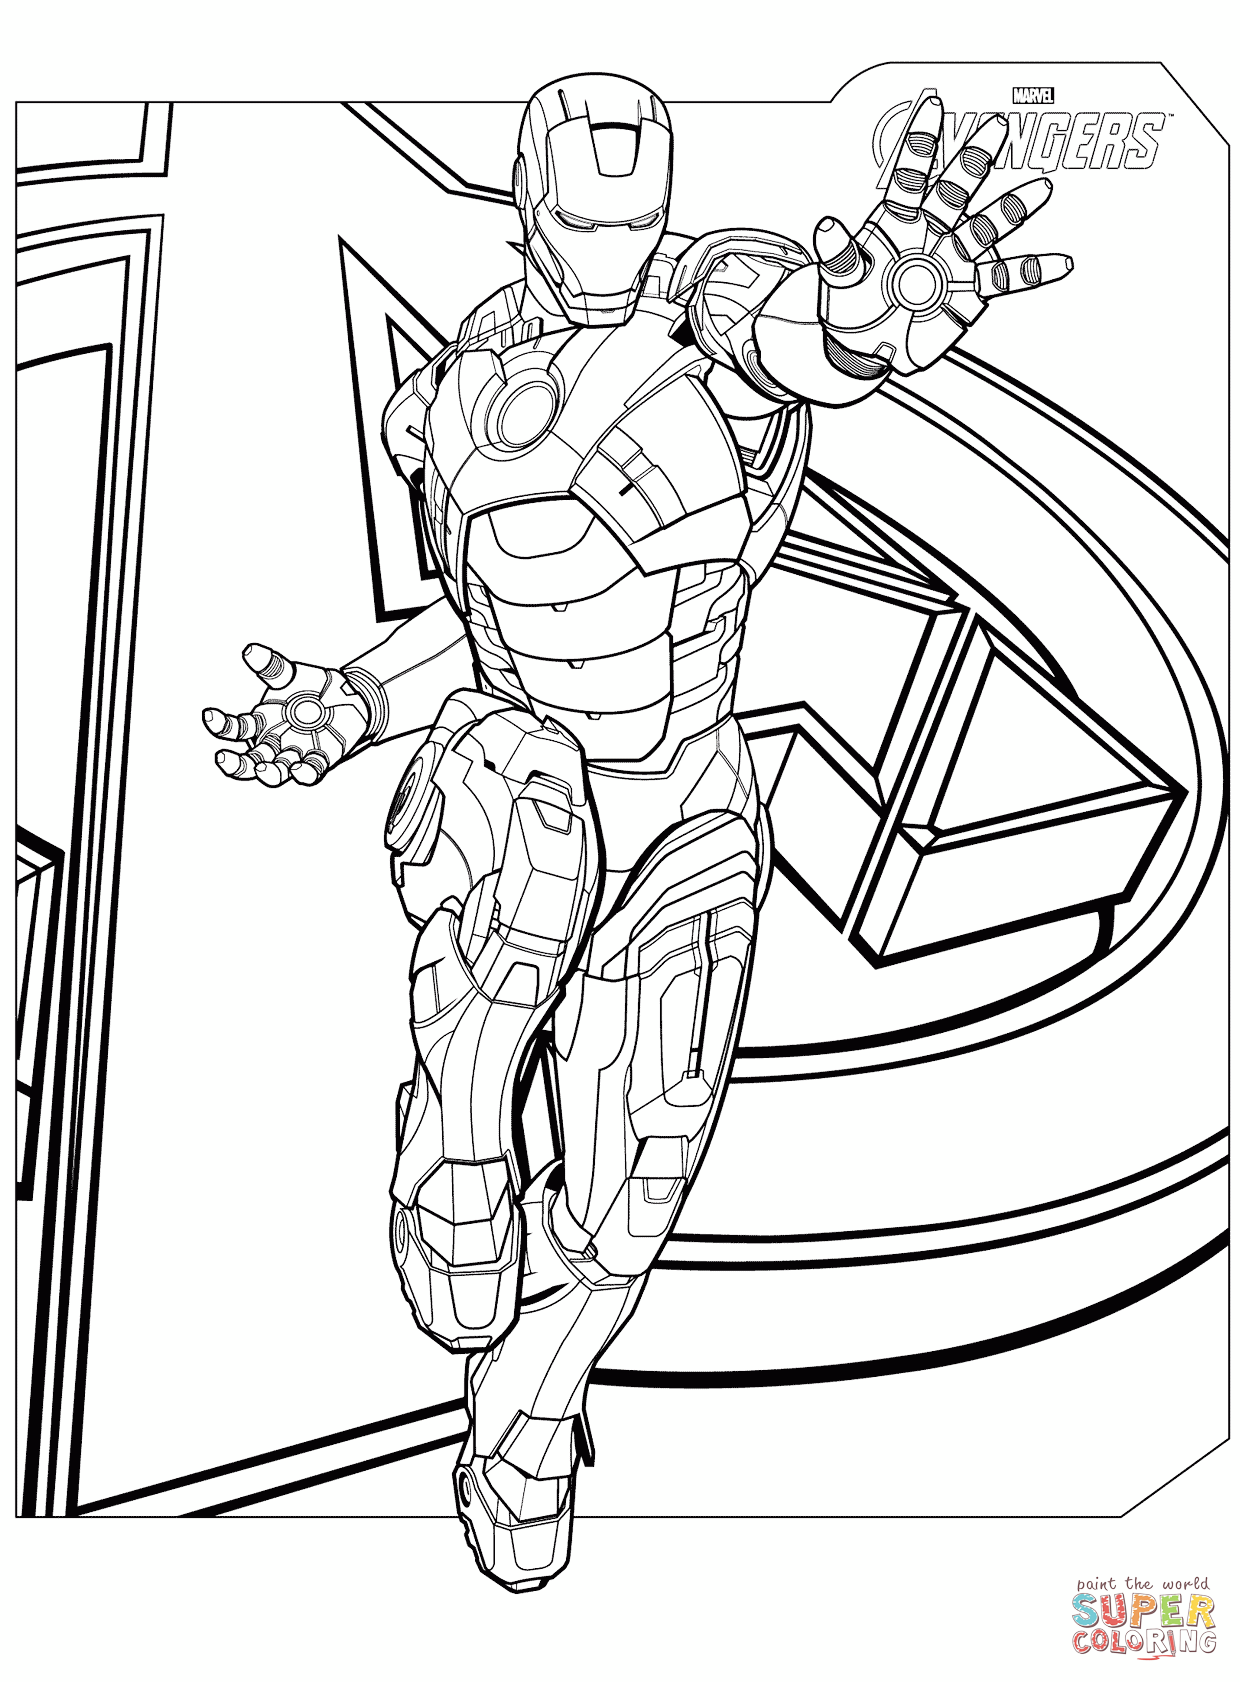 Avengers Iron Man coloring page | Free Printable Coloring Pages